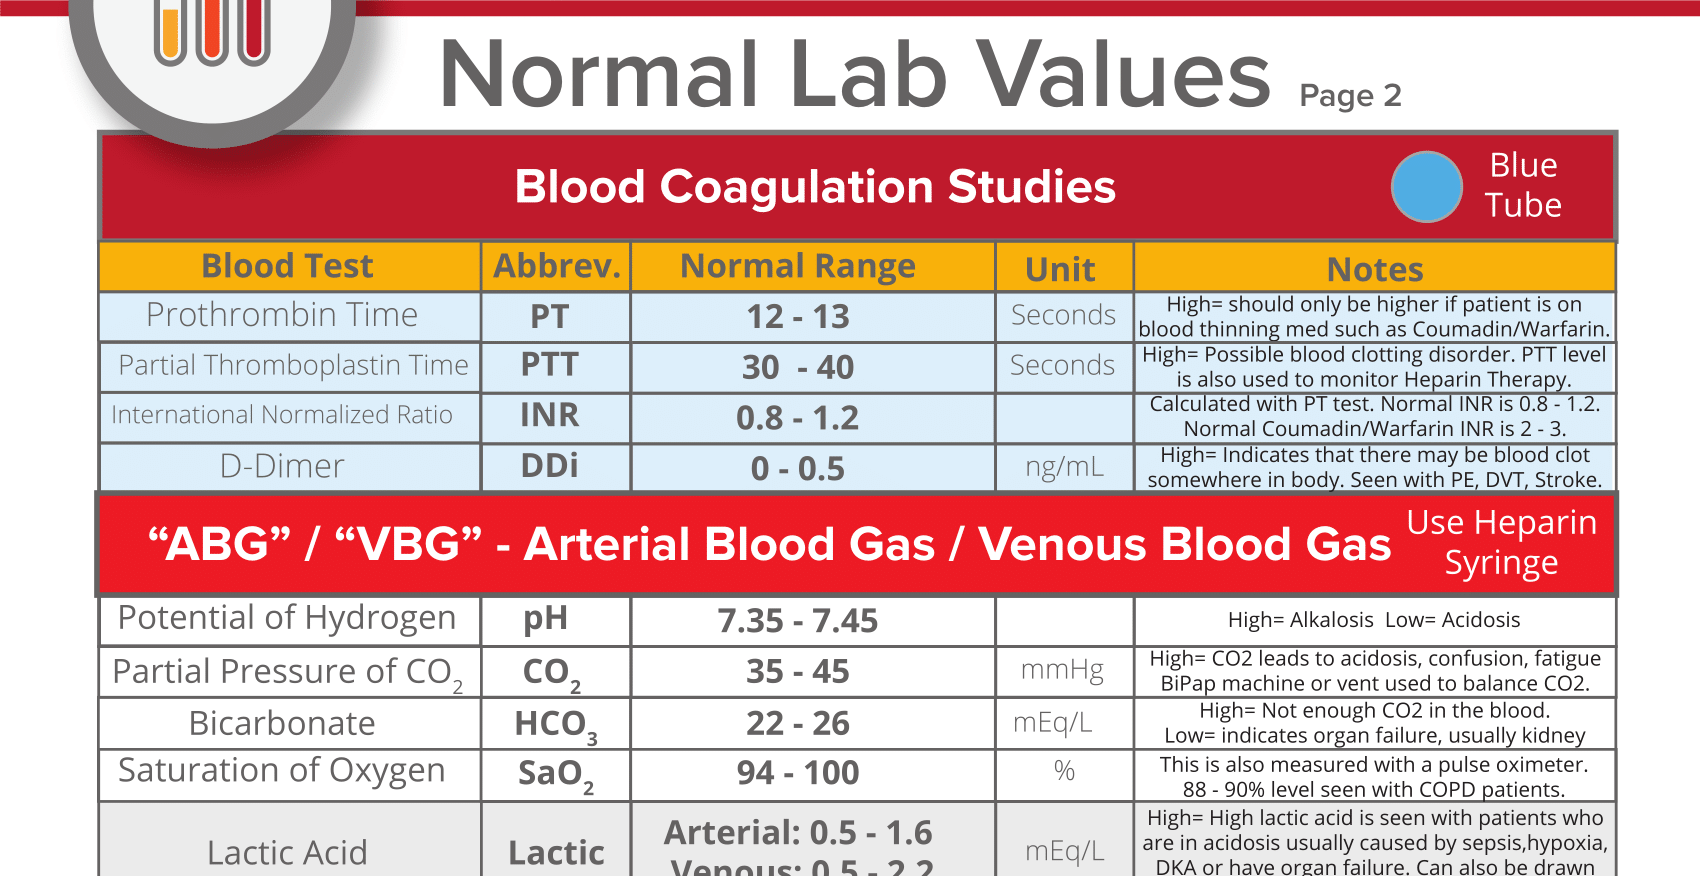 Available values. Normal Lab values. Normal Lab values Cardiac Marker. Saturation normal. Normal Lab values a1c.